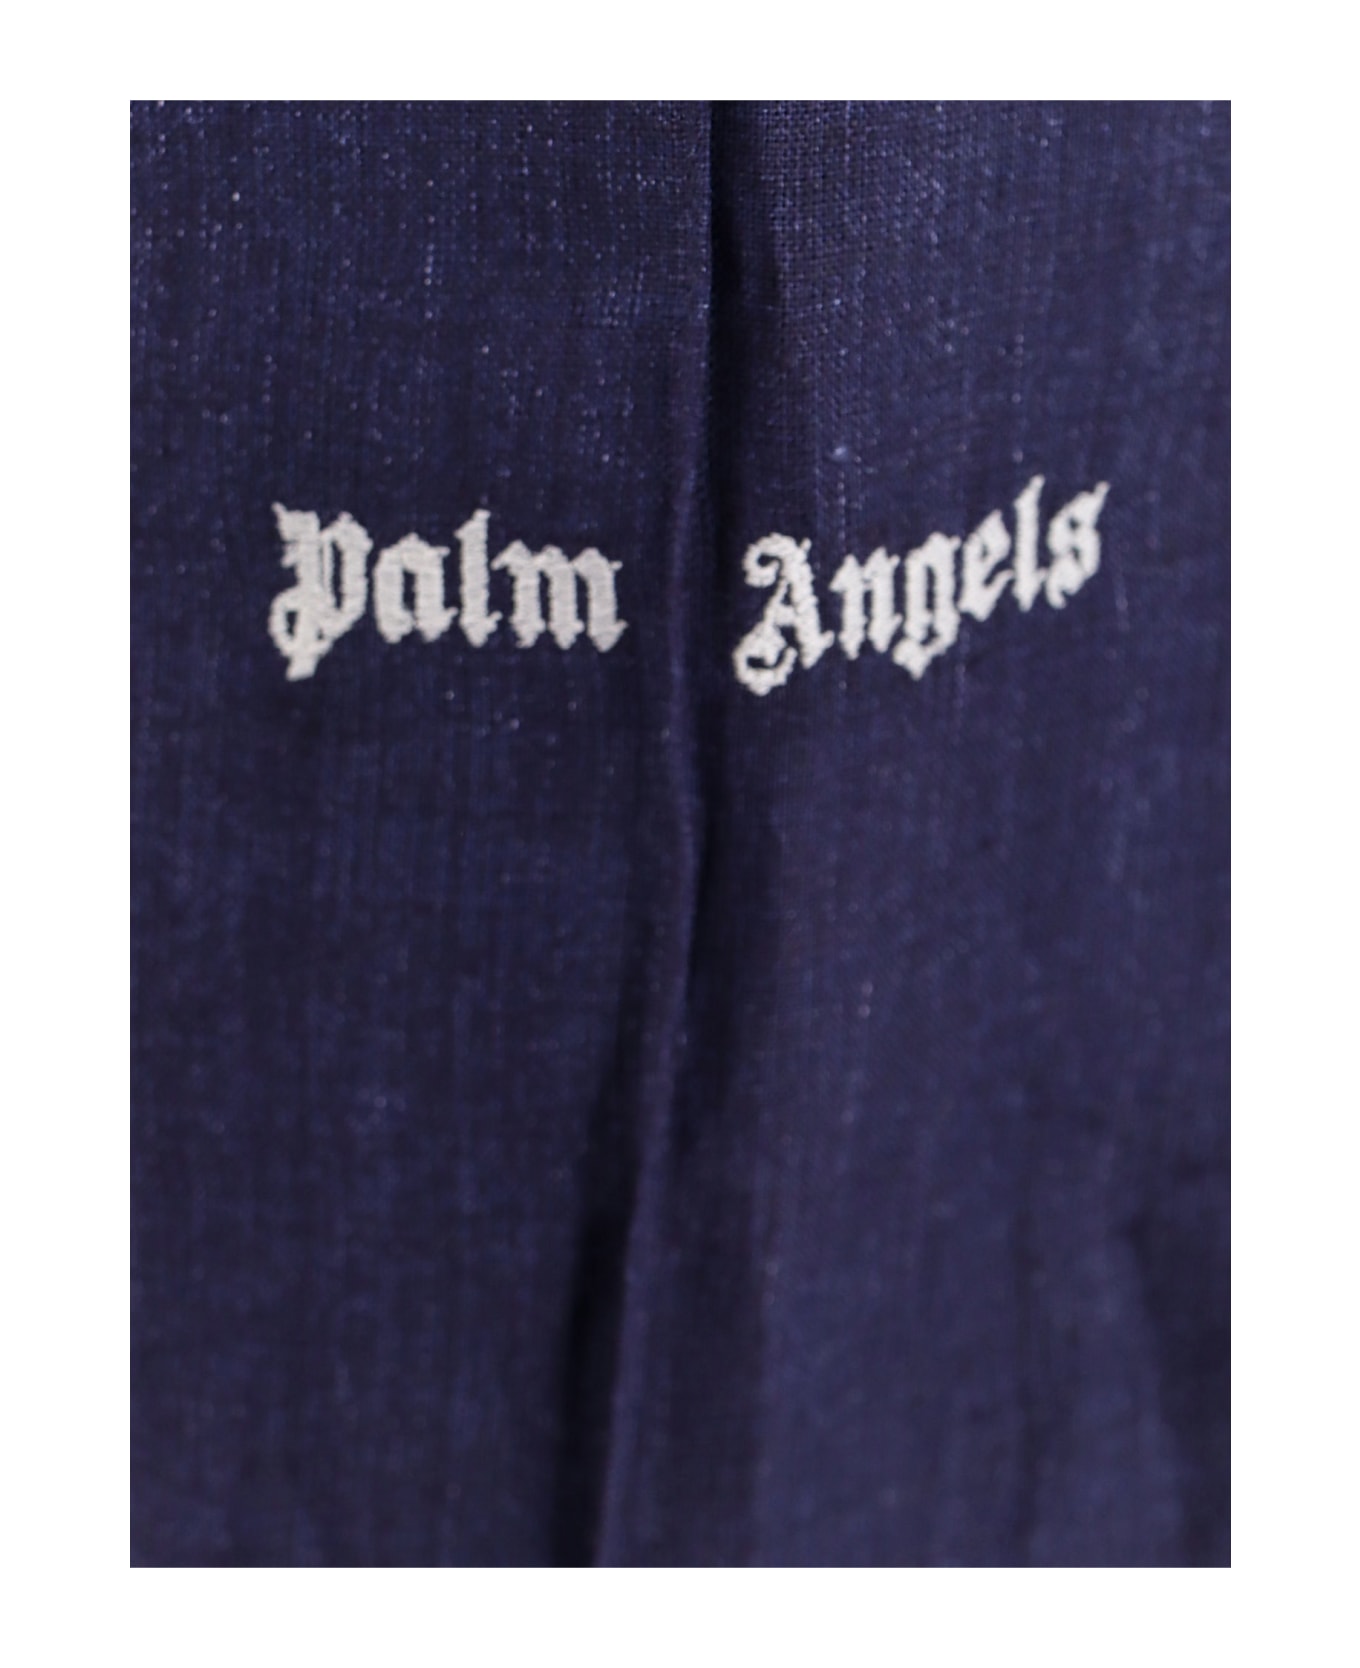 Palm Angels Trouser - NAVY BLUE